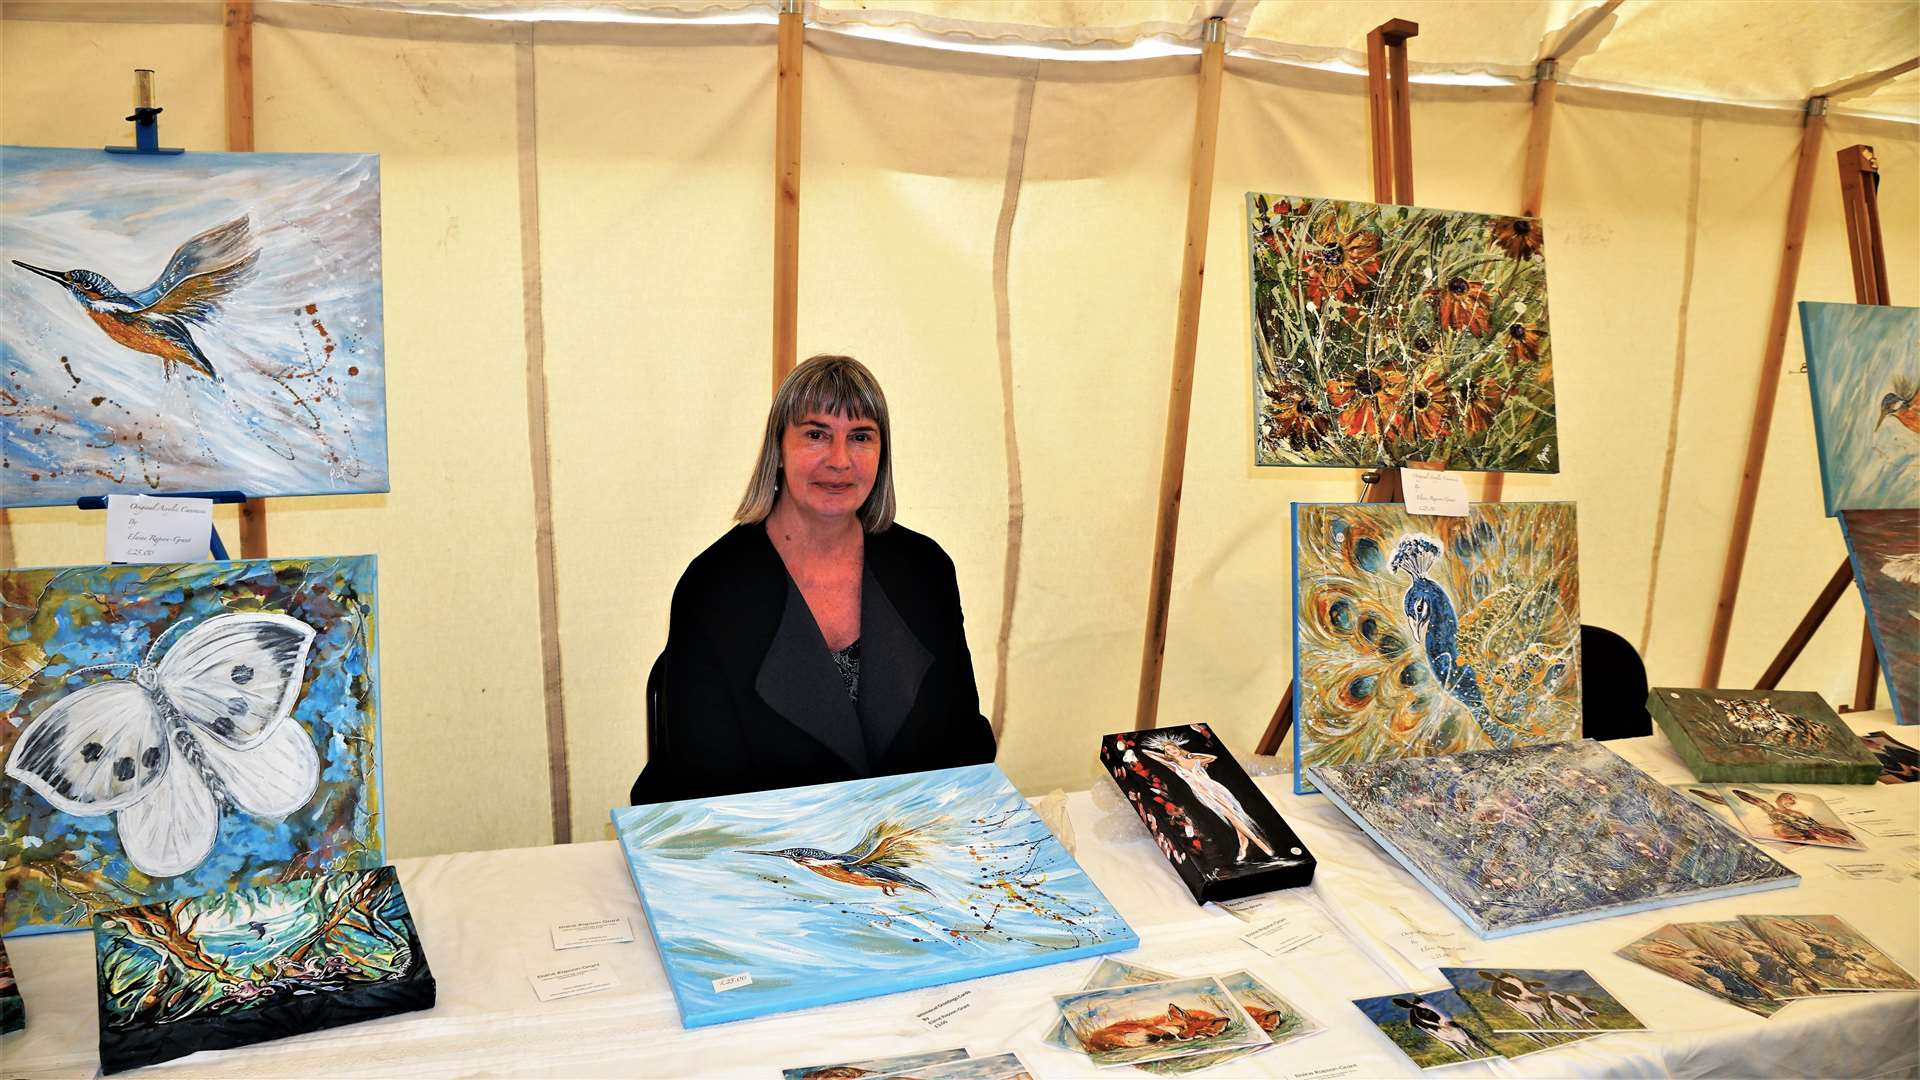 Elaine Rapson-Grant with some of her art at a vintage car rally in John O'Groats two years ago. Picture: DGS